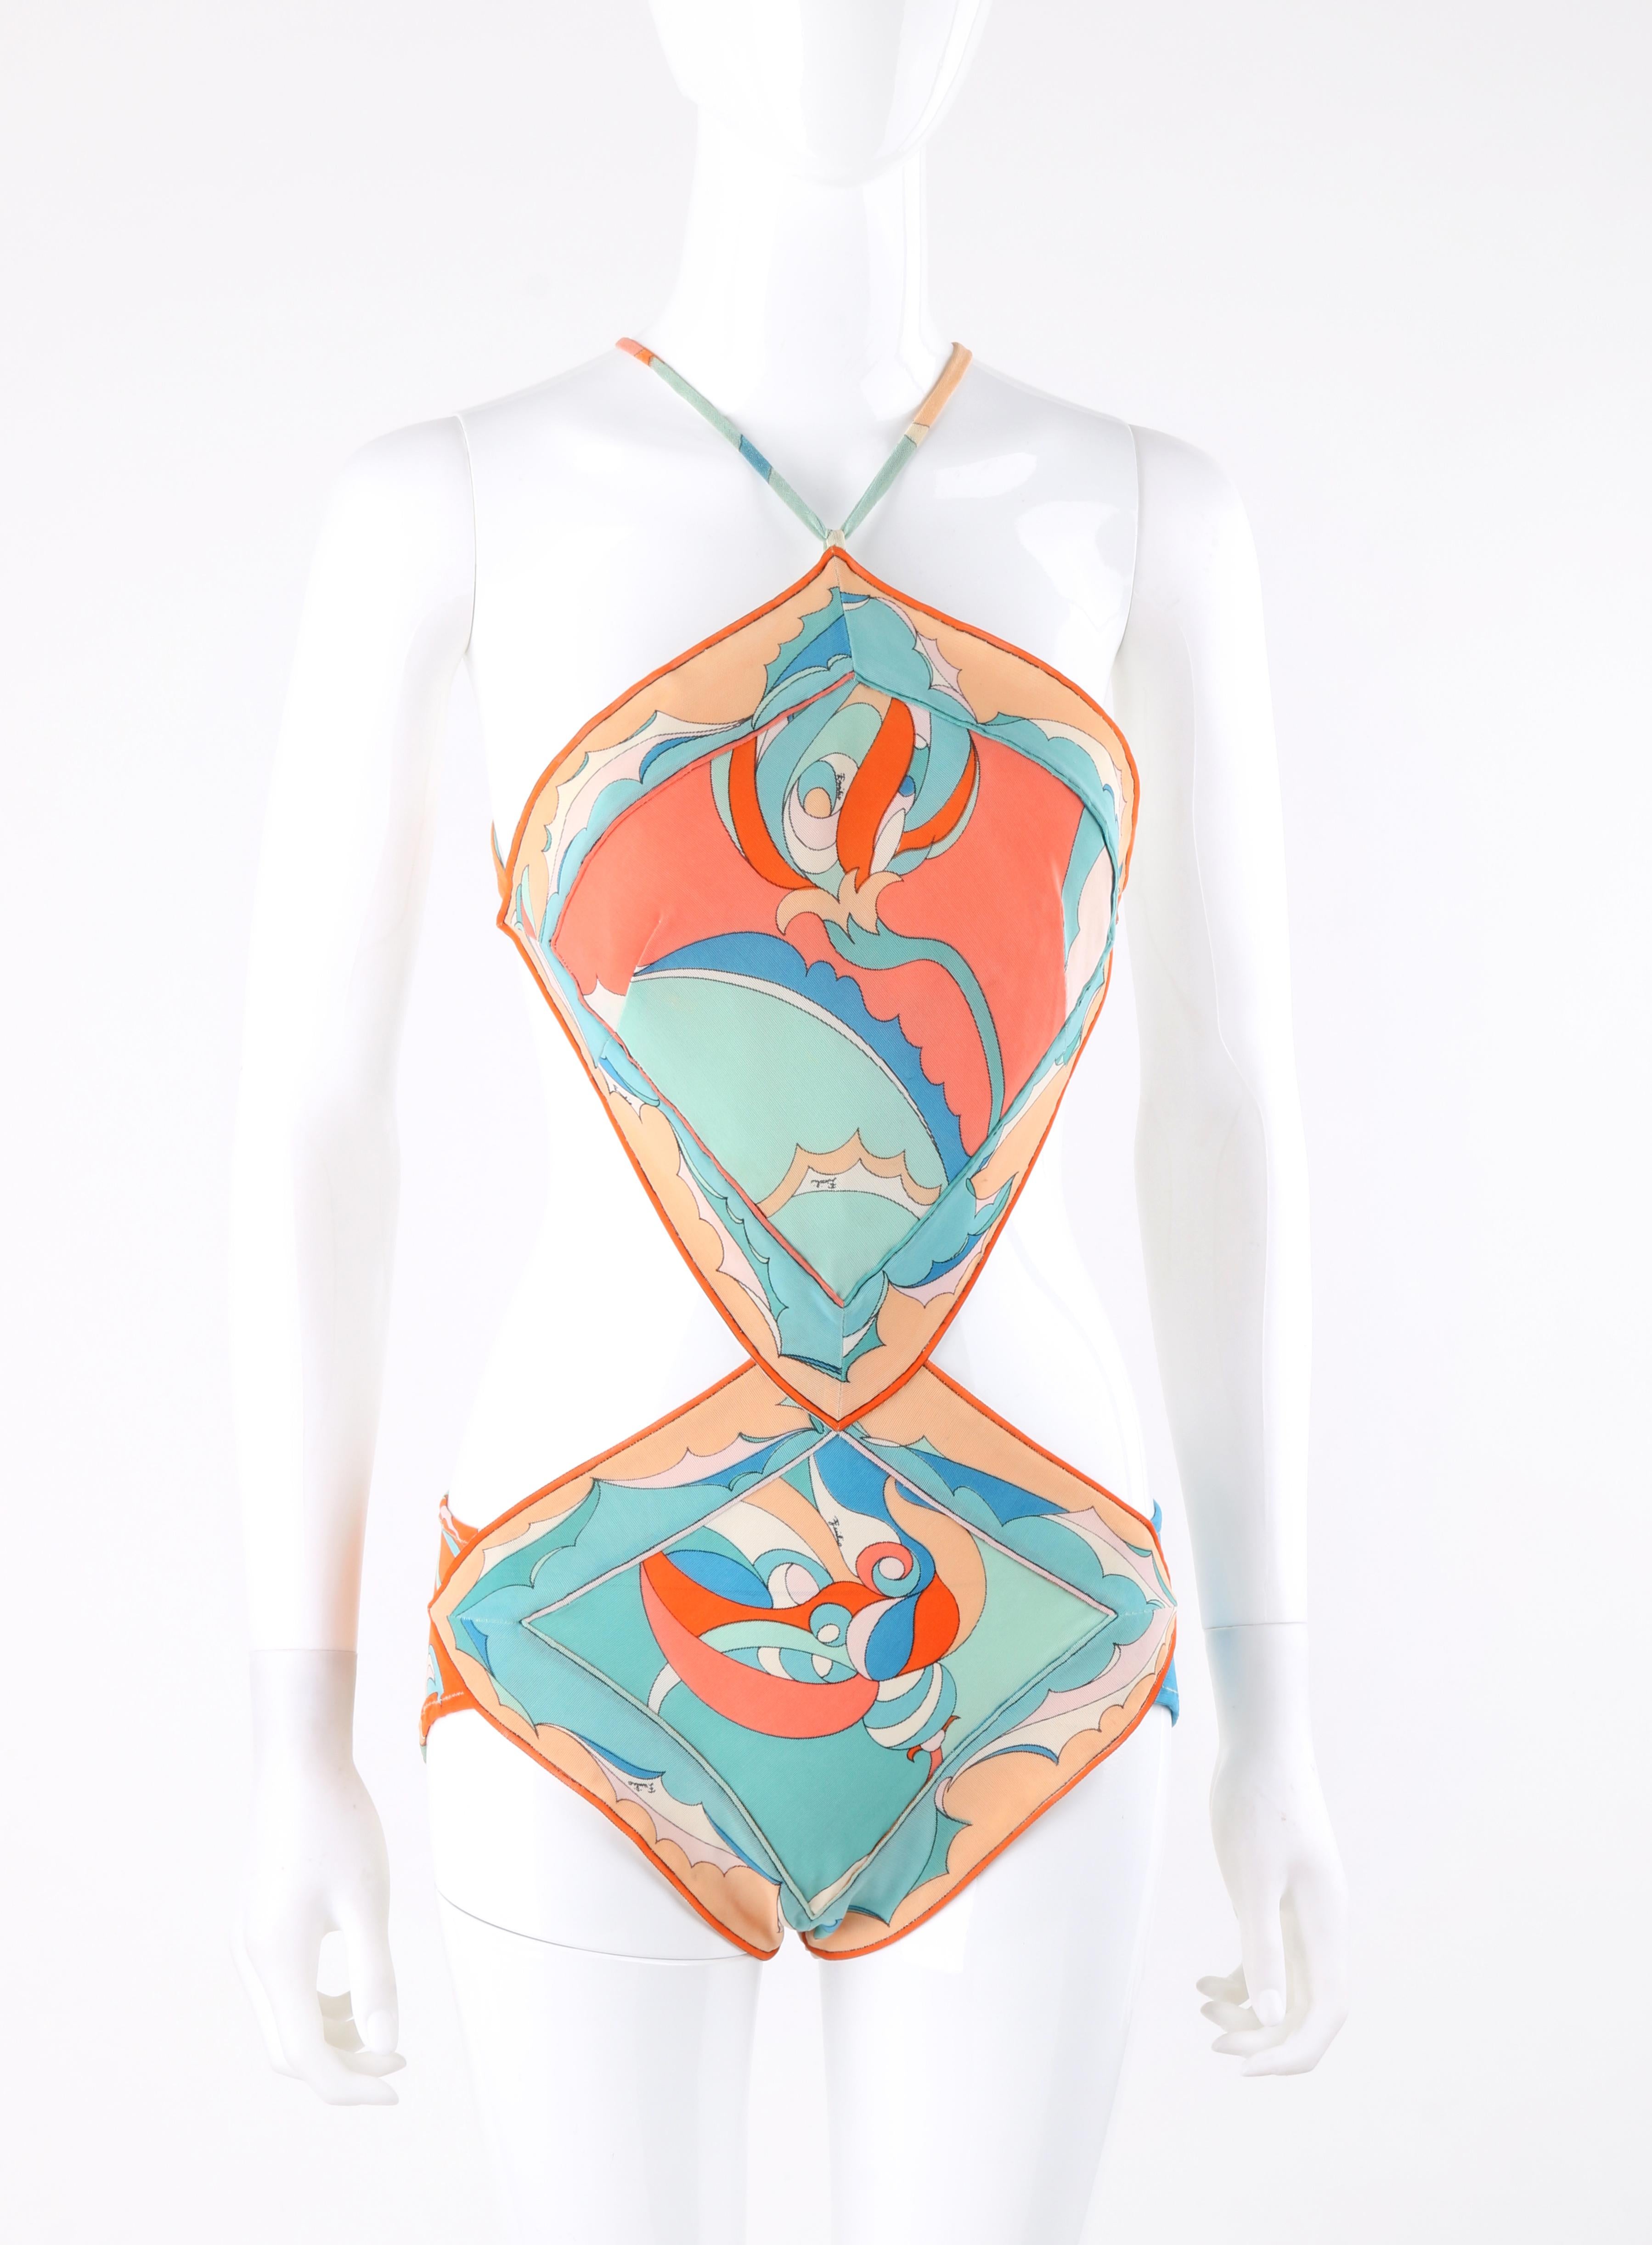 EMILIO PUCCI c.1960’s Coral Teal Signature Print Diamond Cut One-Piece Swimsuit  
 
Circa: 1960’s
Label(s): Emilio Pucci / Made In Italy For Lord & Taylor  
Style: One Piece Bathing Swimsuit 
Color(s): Shades of orange, coral, teal green, blue, pink